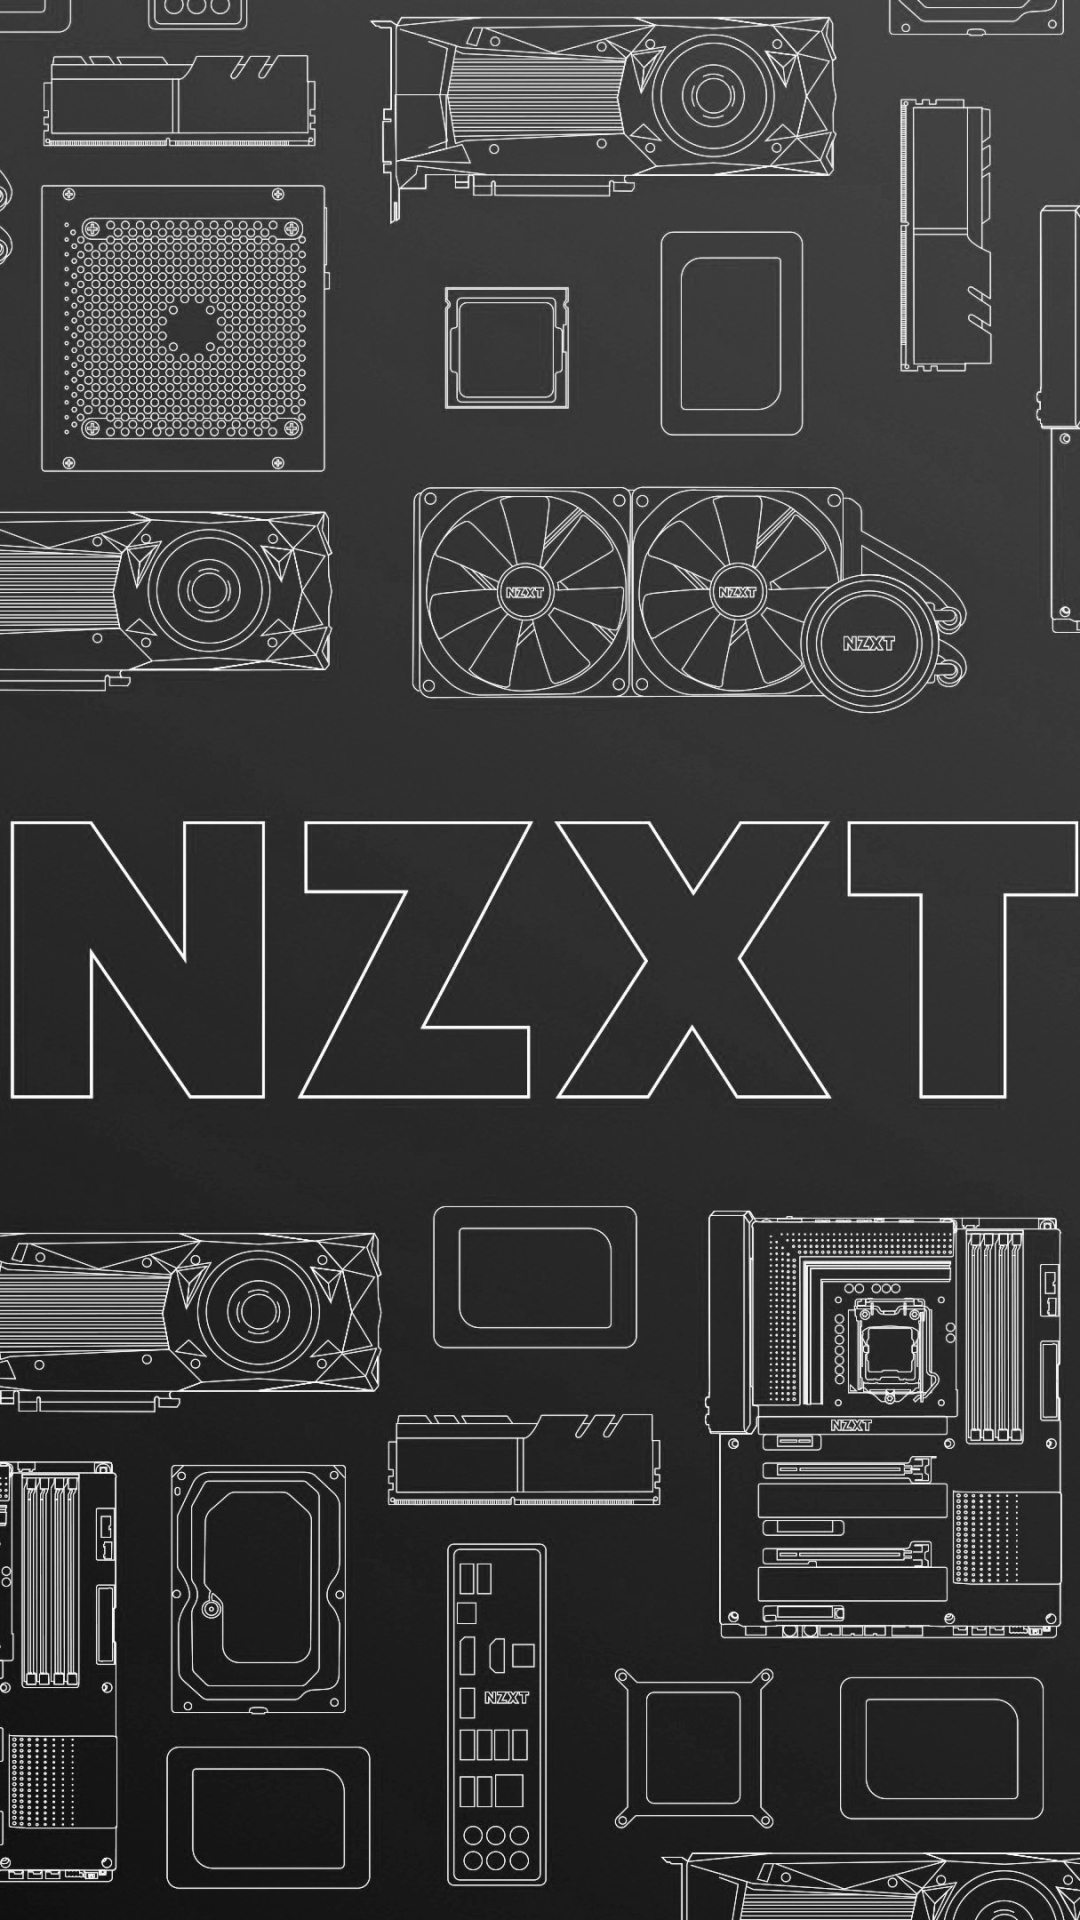 NZXTs BLD Wallpapers on Behance